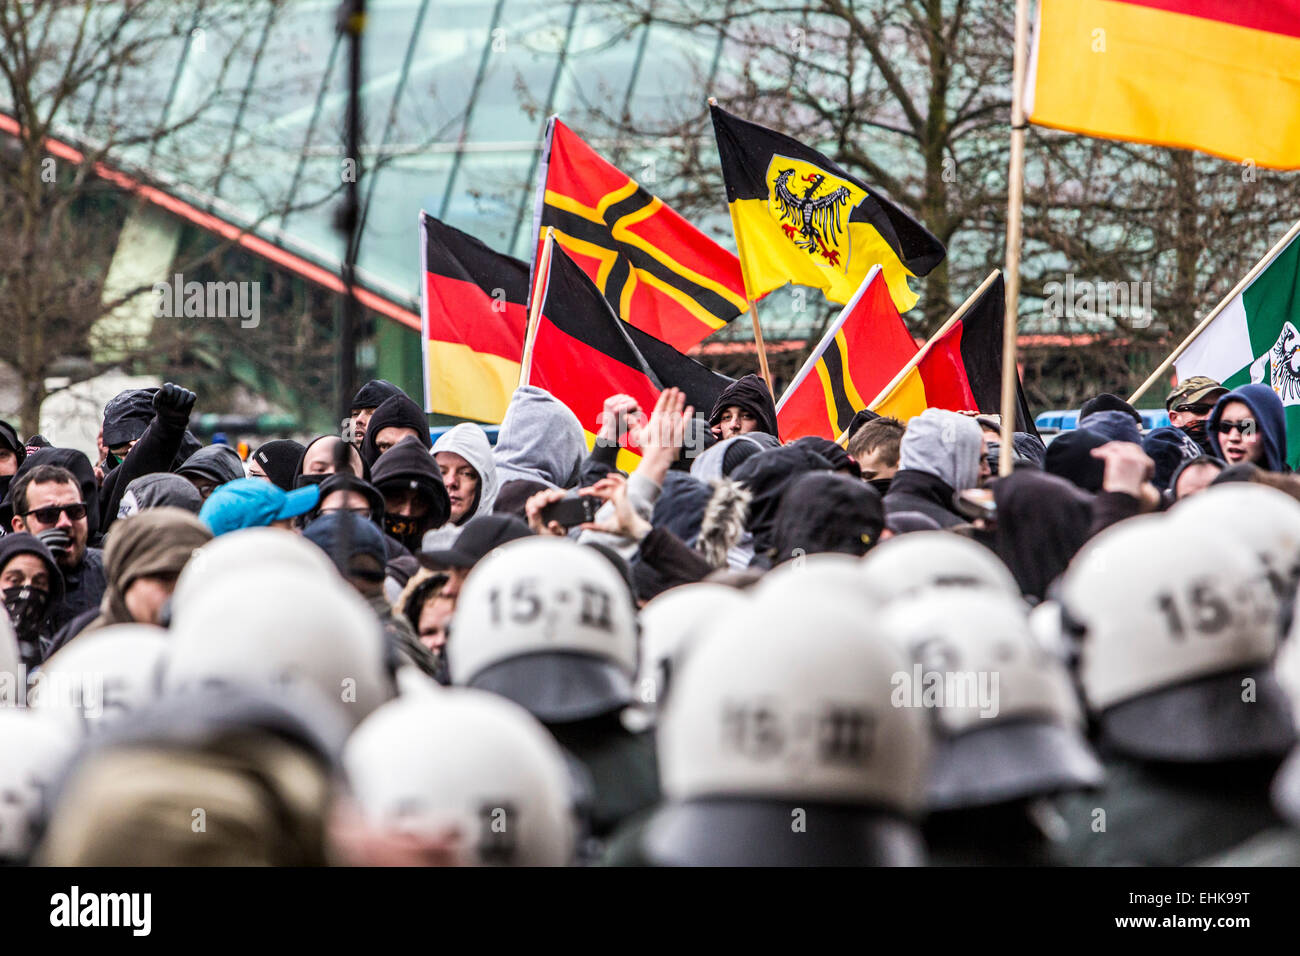 Demonstration of right wing PEGIDA organization, together with violent Hooligans, against a meeting of Islamic Salafist groups Stock Photo